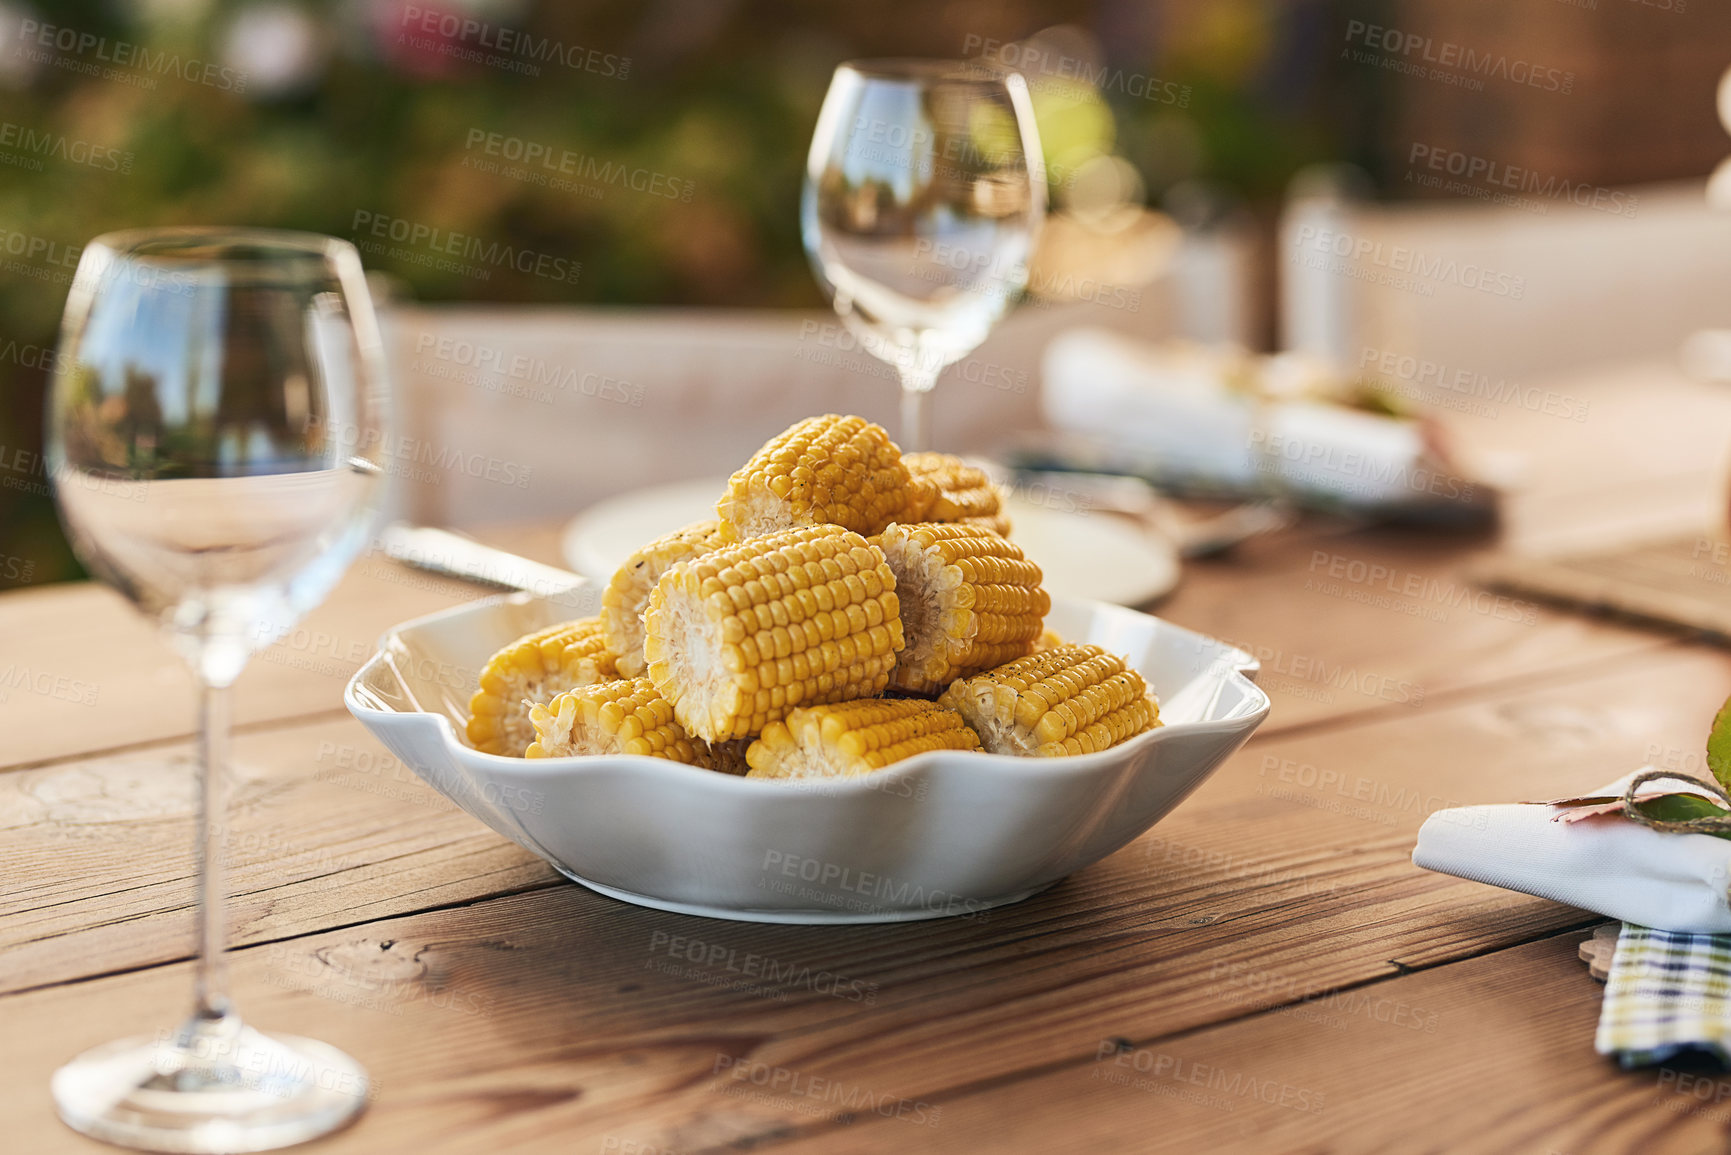 Buy stock photo Corn, food and table set for lunch outdoors with wine glasses. Fine dining, champagne glasses and delicious healthy maize in bowl for brunch party, buffet or celebration with luxury meal outside.
